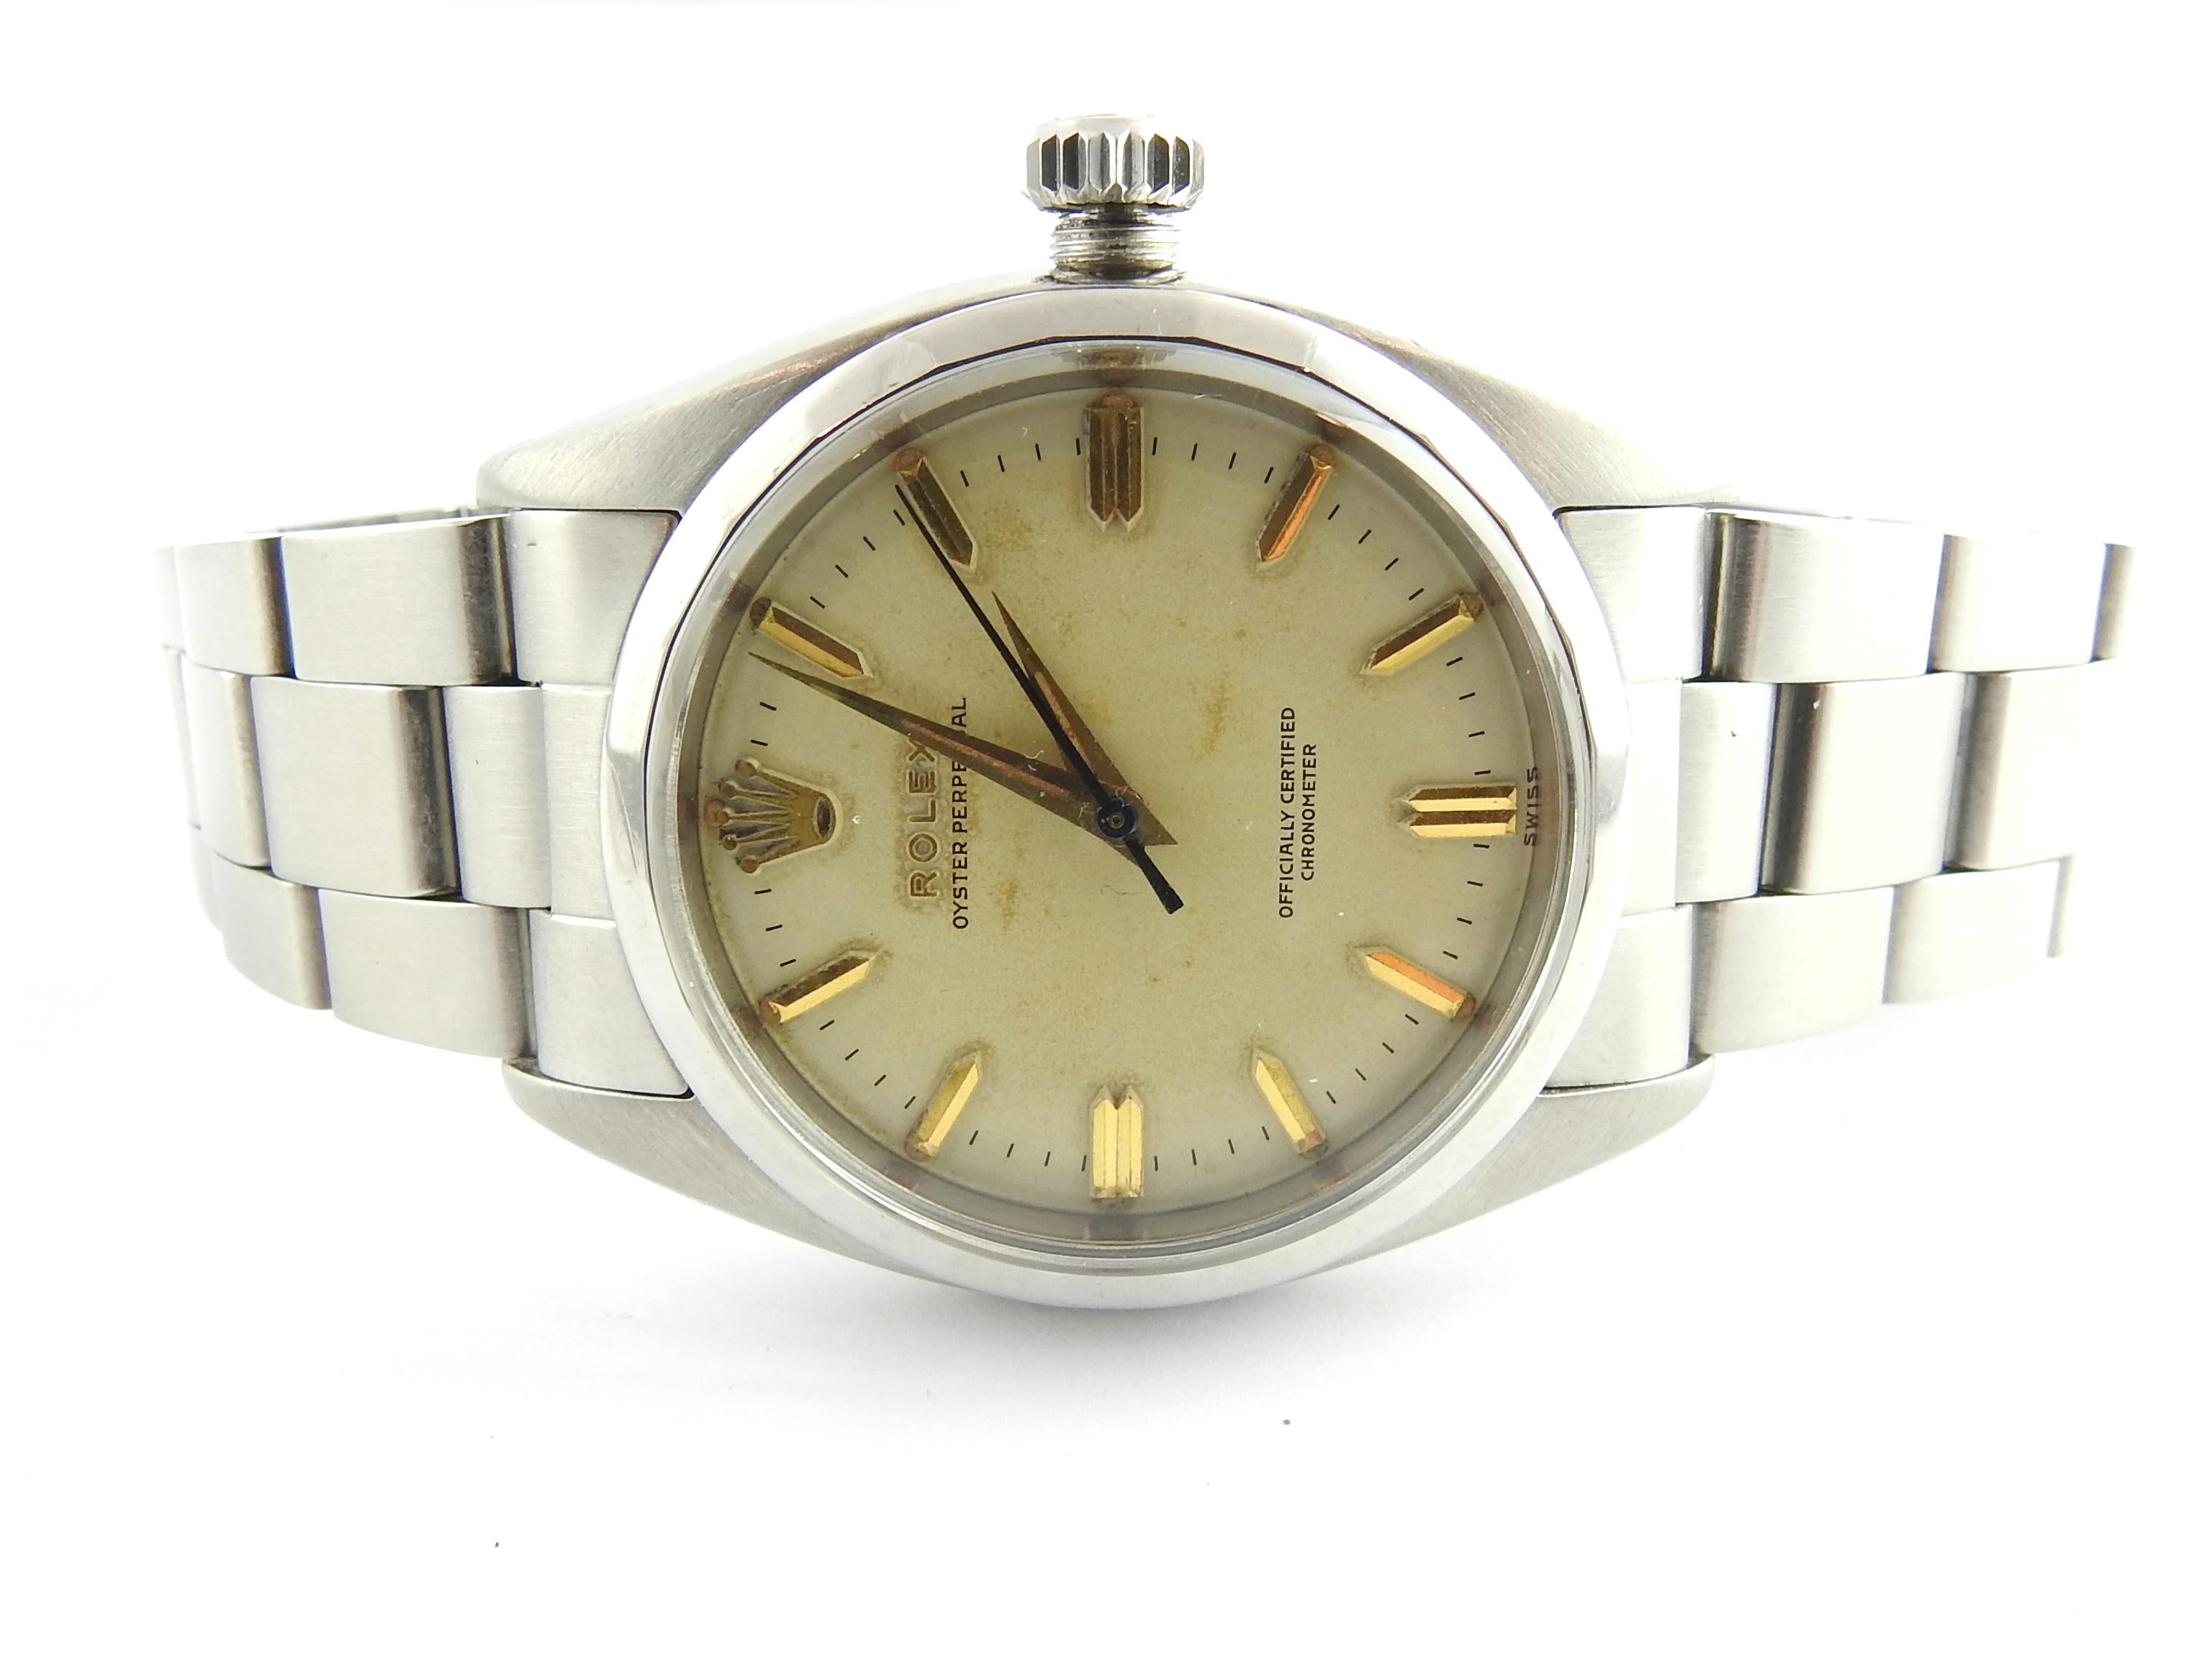 1955 Rolex Men's Watch

Model: 6586

Serial: 97860

Automatic movement

White Dial - gold markers. White dial has yellowed a bit with age.

Stainless steel case and band. White gold bezel

34 mm case

Fits up to 7 1/4